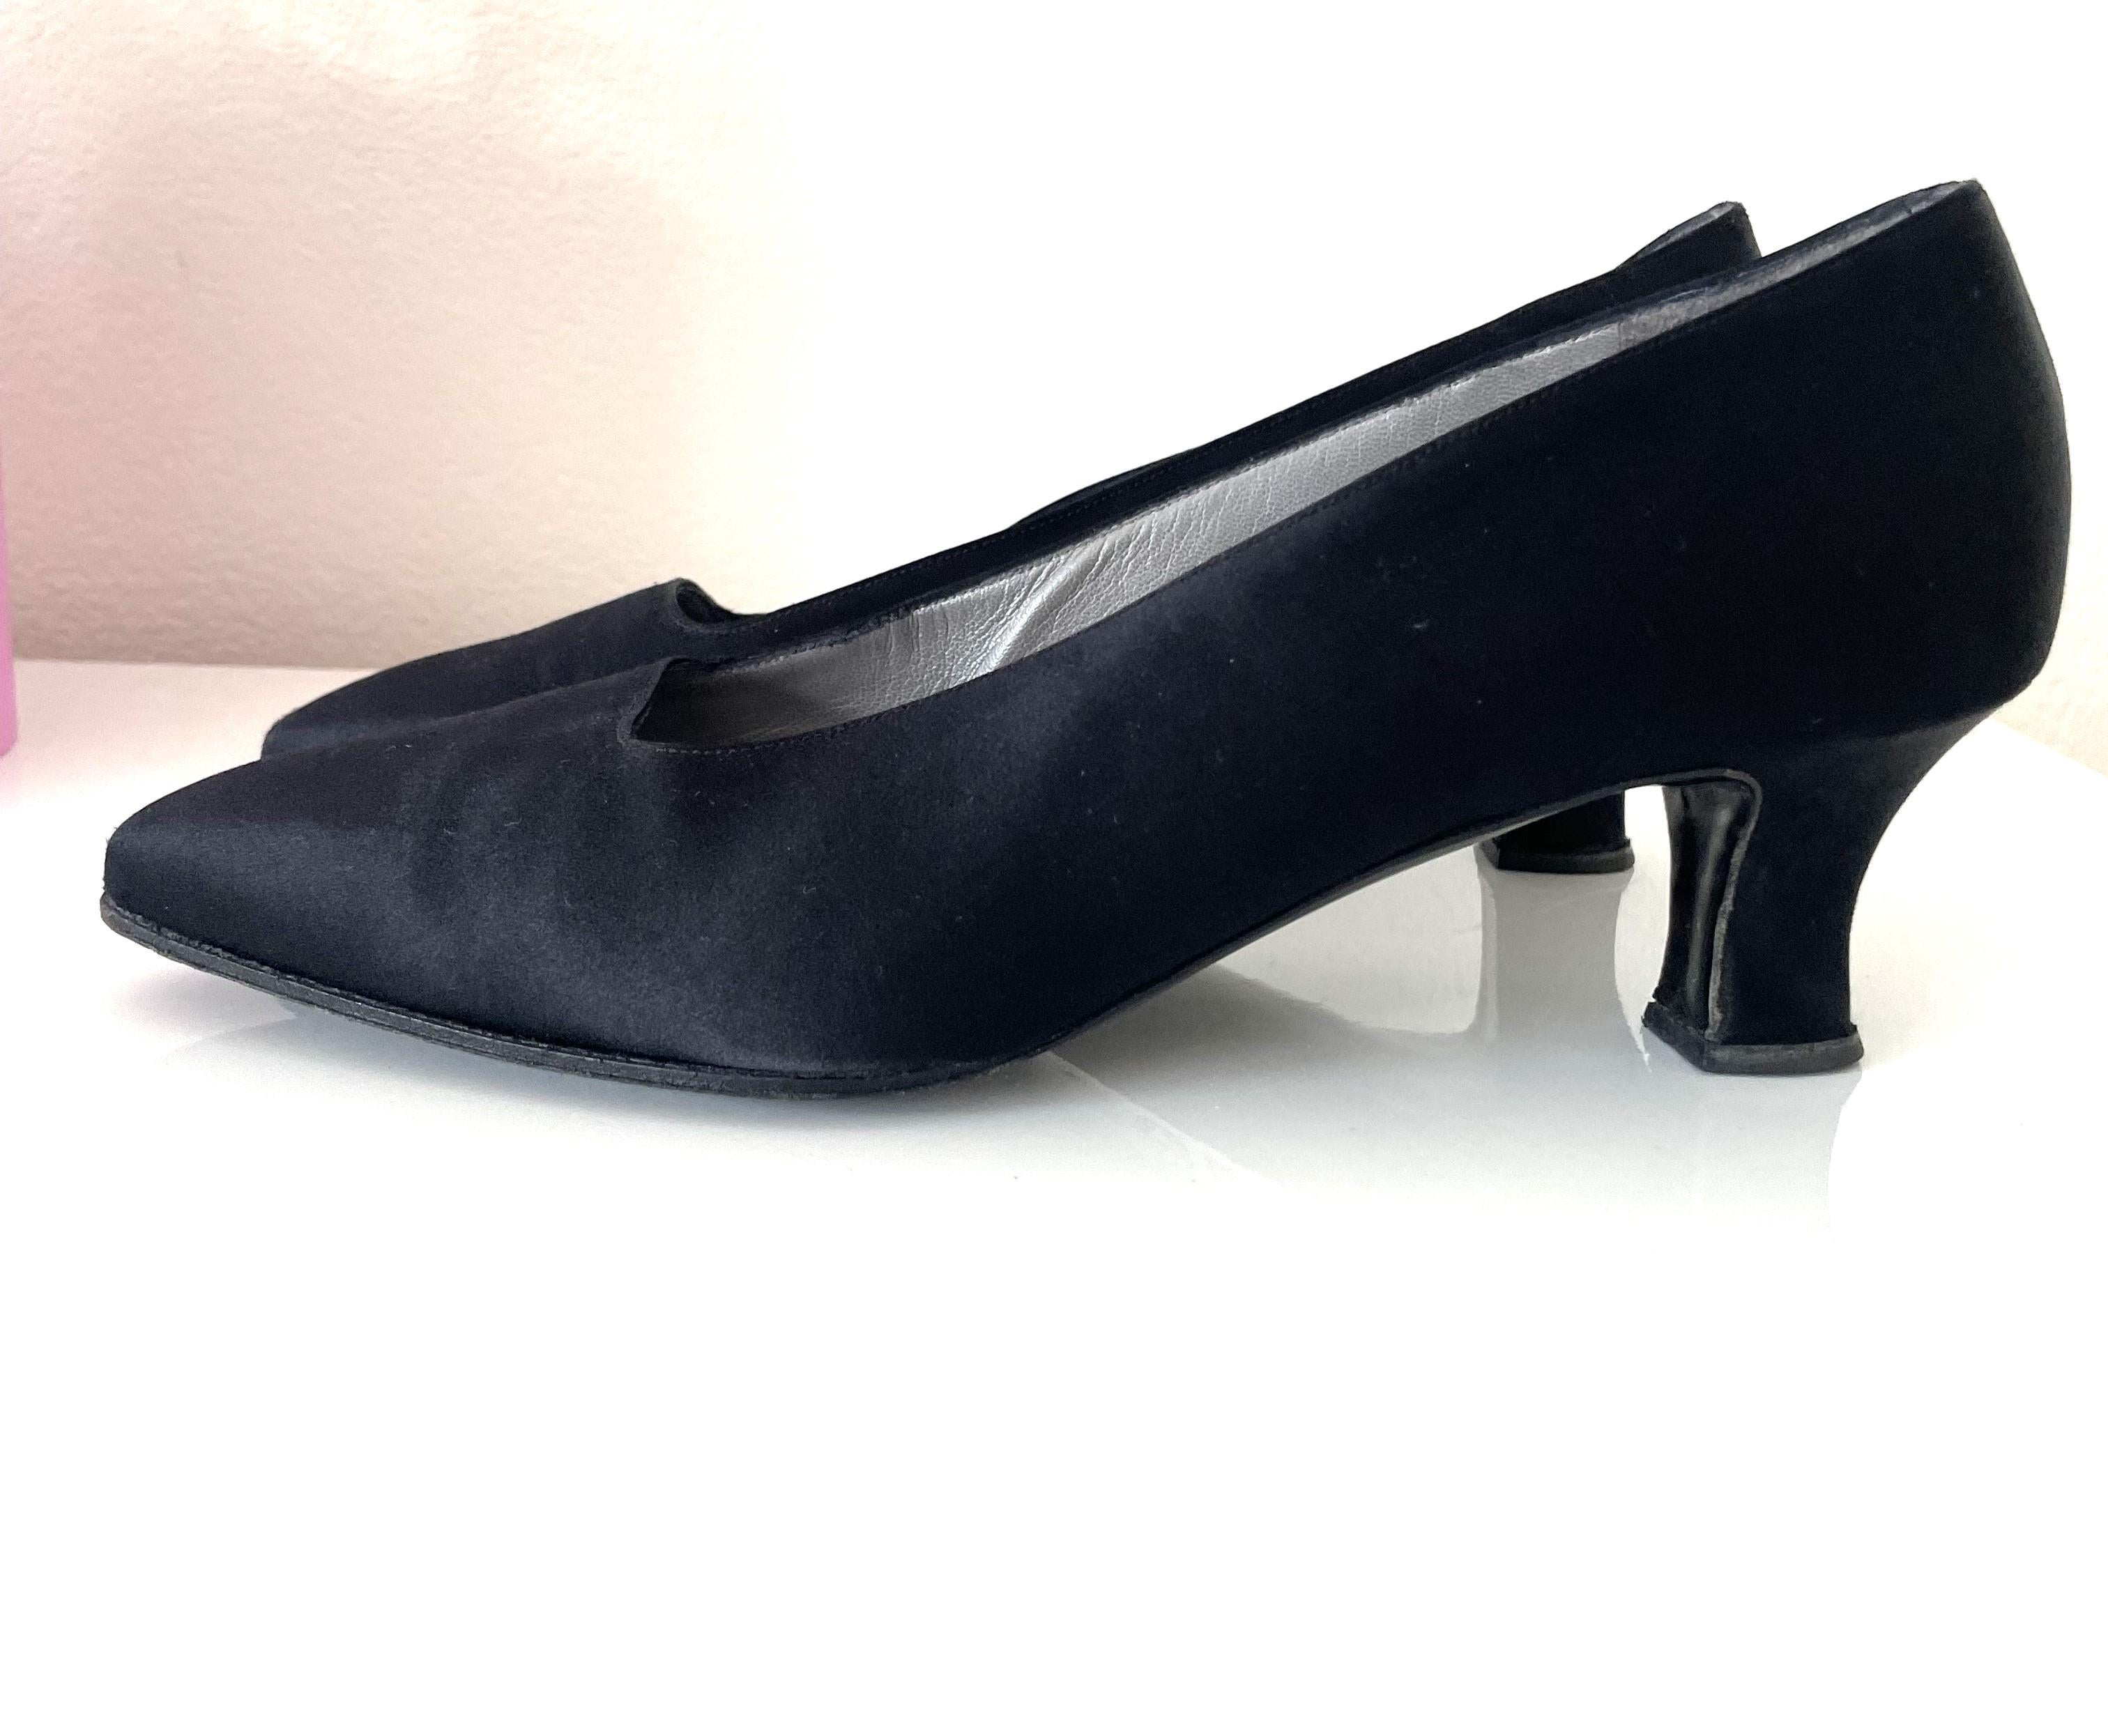 These exceptional unique CD Boutique pumps size 39,5 were typically crafted from luxurious satin fabric. Satin is a smooth, glossy fabric known for its sheen and soft texture, making it a popular choice for evening and special occasion